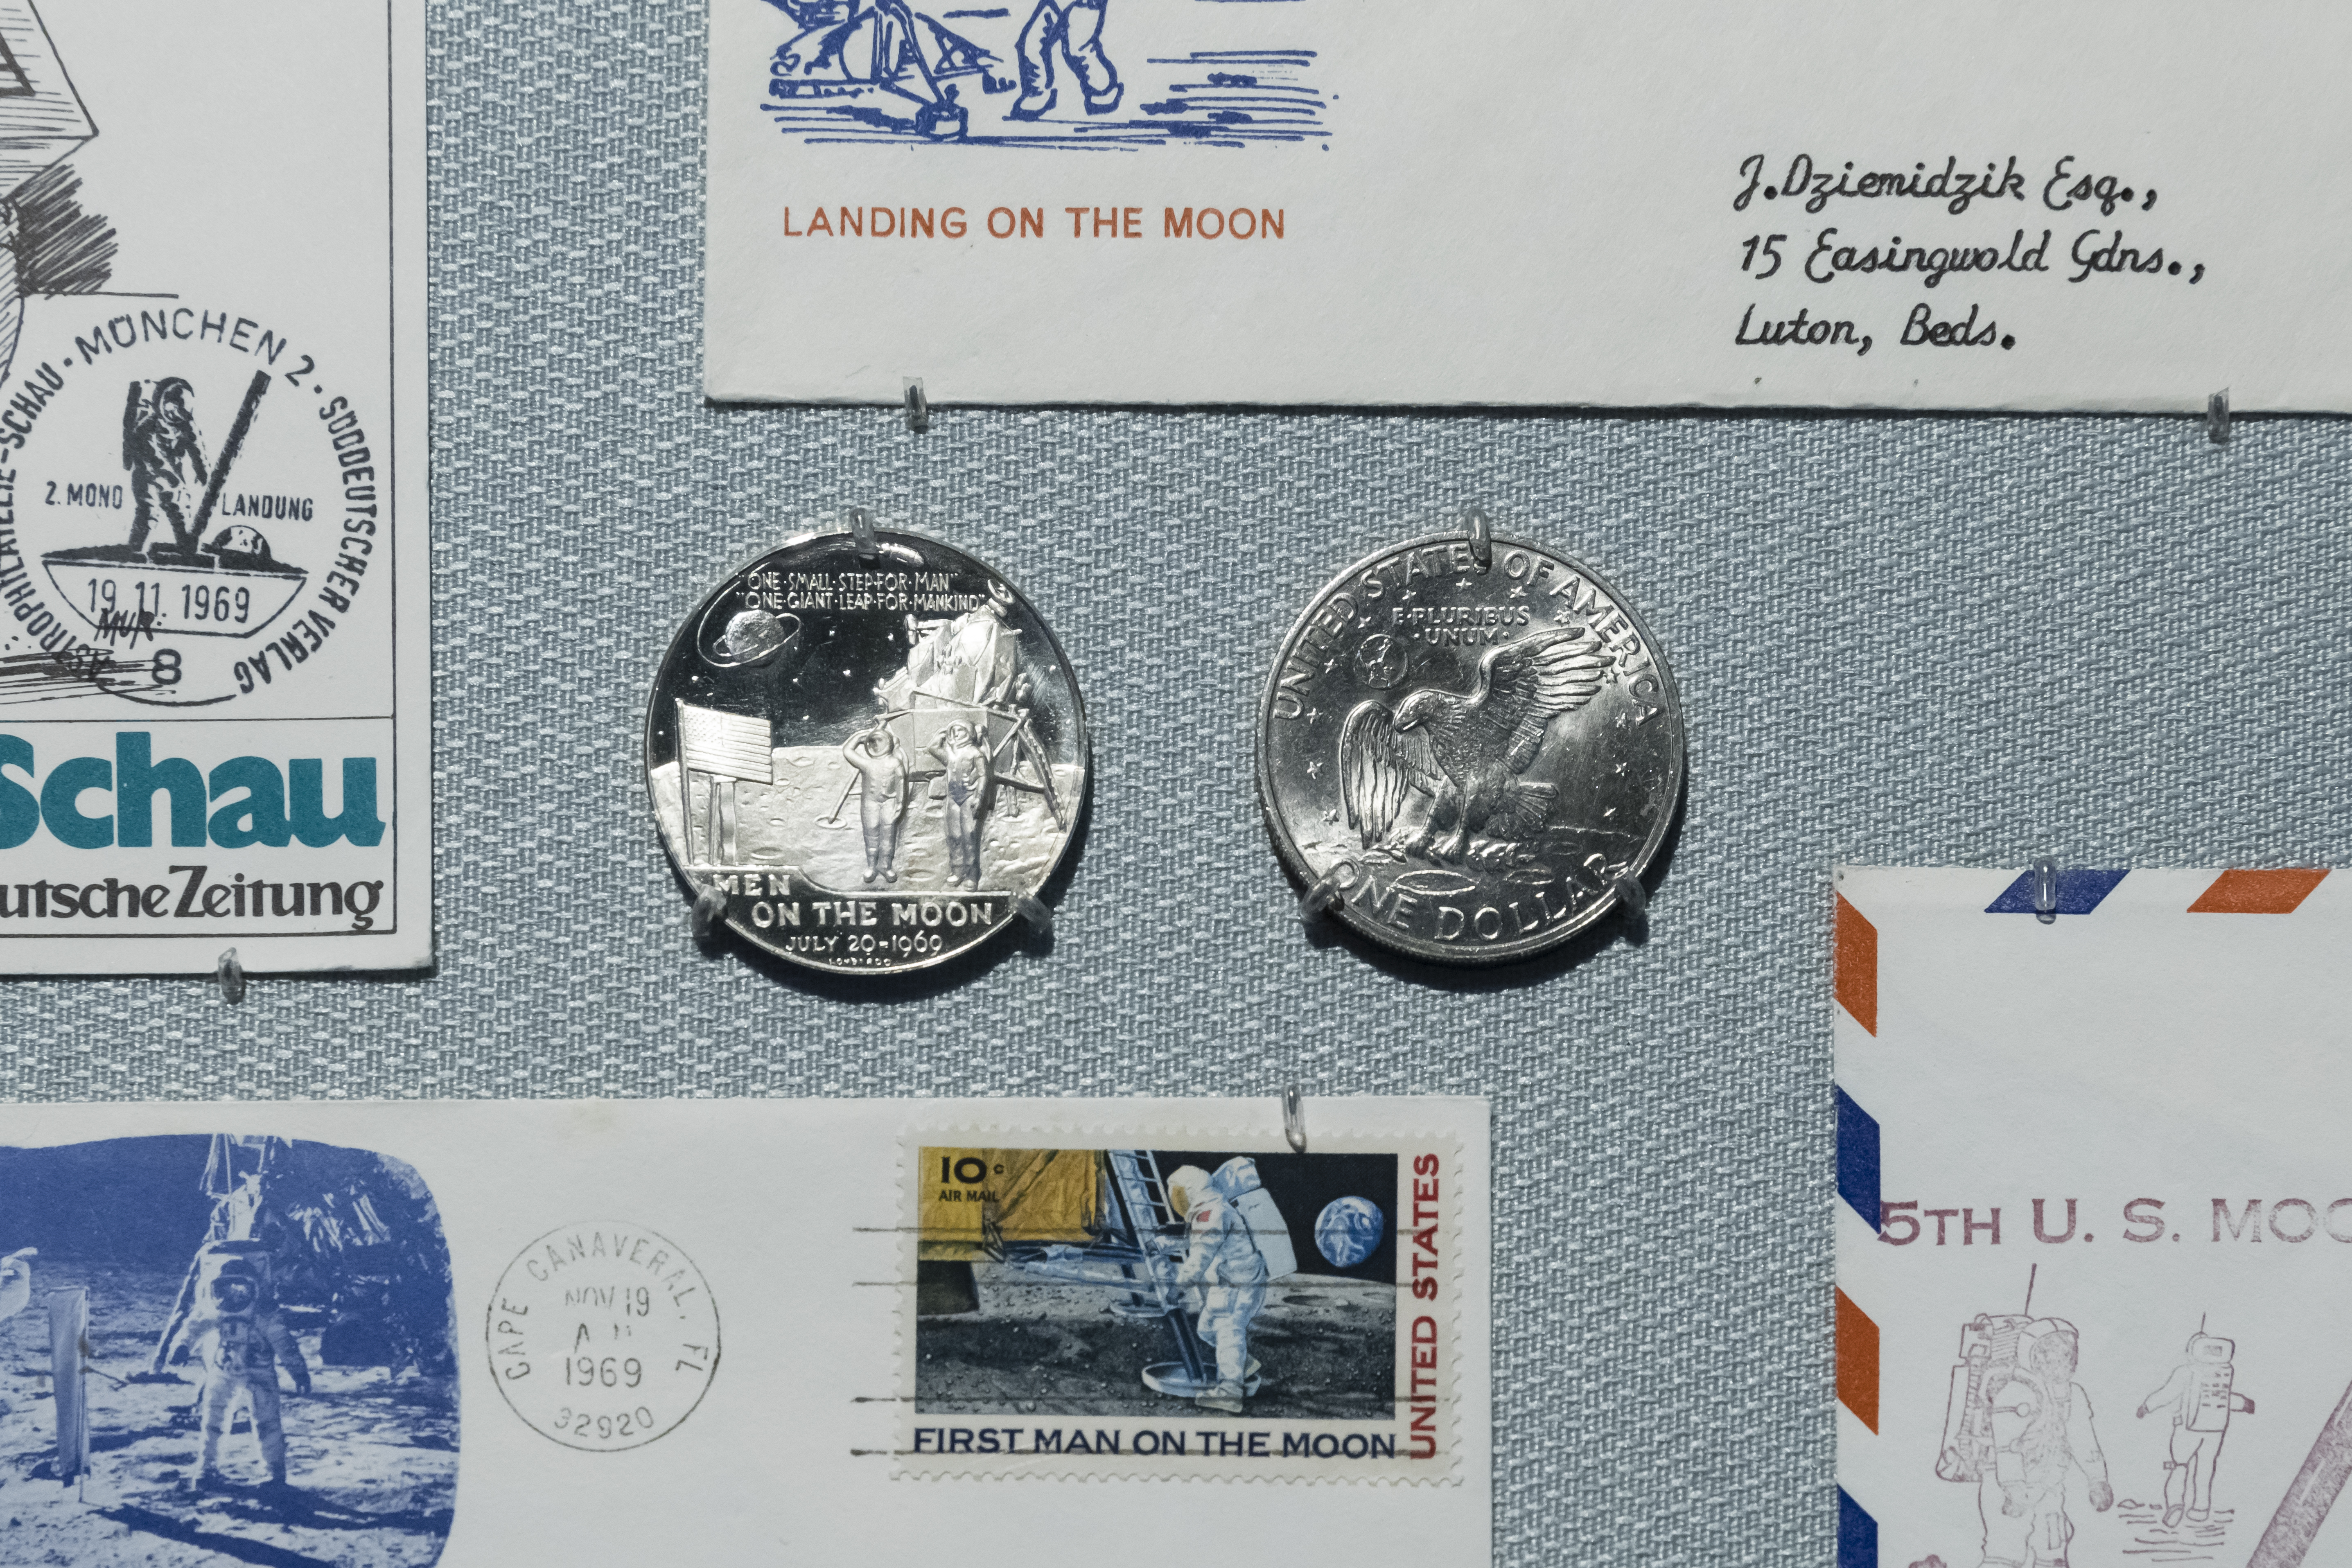 Two small silver medallions, surrounded by commemorative envelopes, all bearing imagery from the Apollo 11 mission.